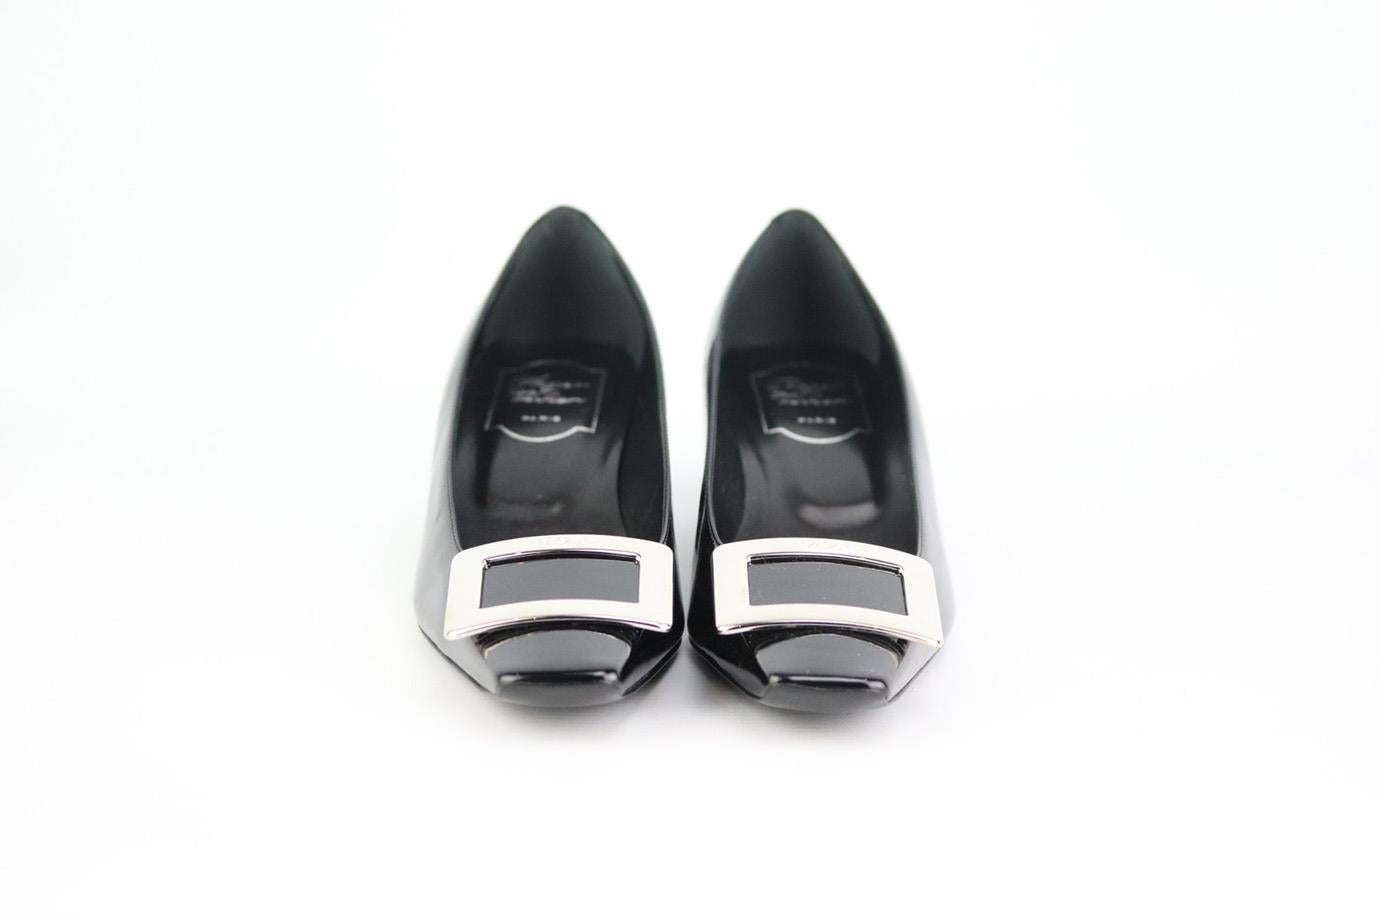 These pumps by Roger Vivier are an elegant re-creation of the founder's original 1965 design, they're made from black patent-leather and embellished with a silver signature buckle that tops the sharp square toe. Heel measures approximately 38 mm/